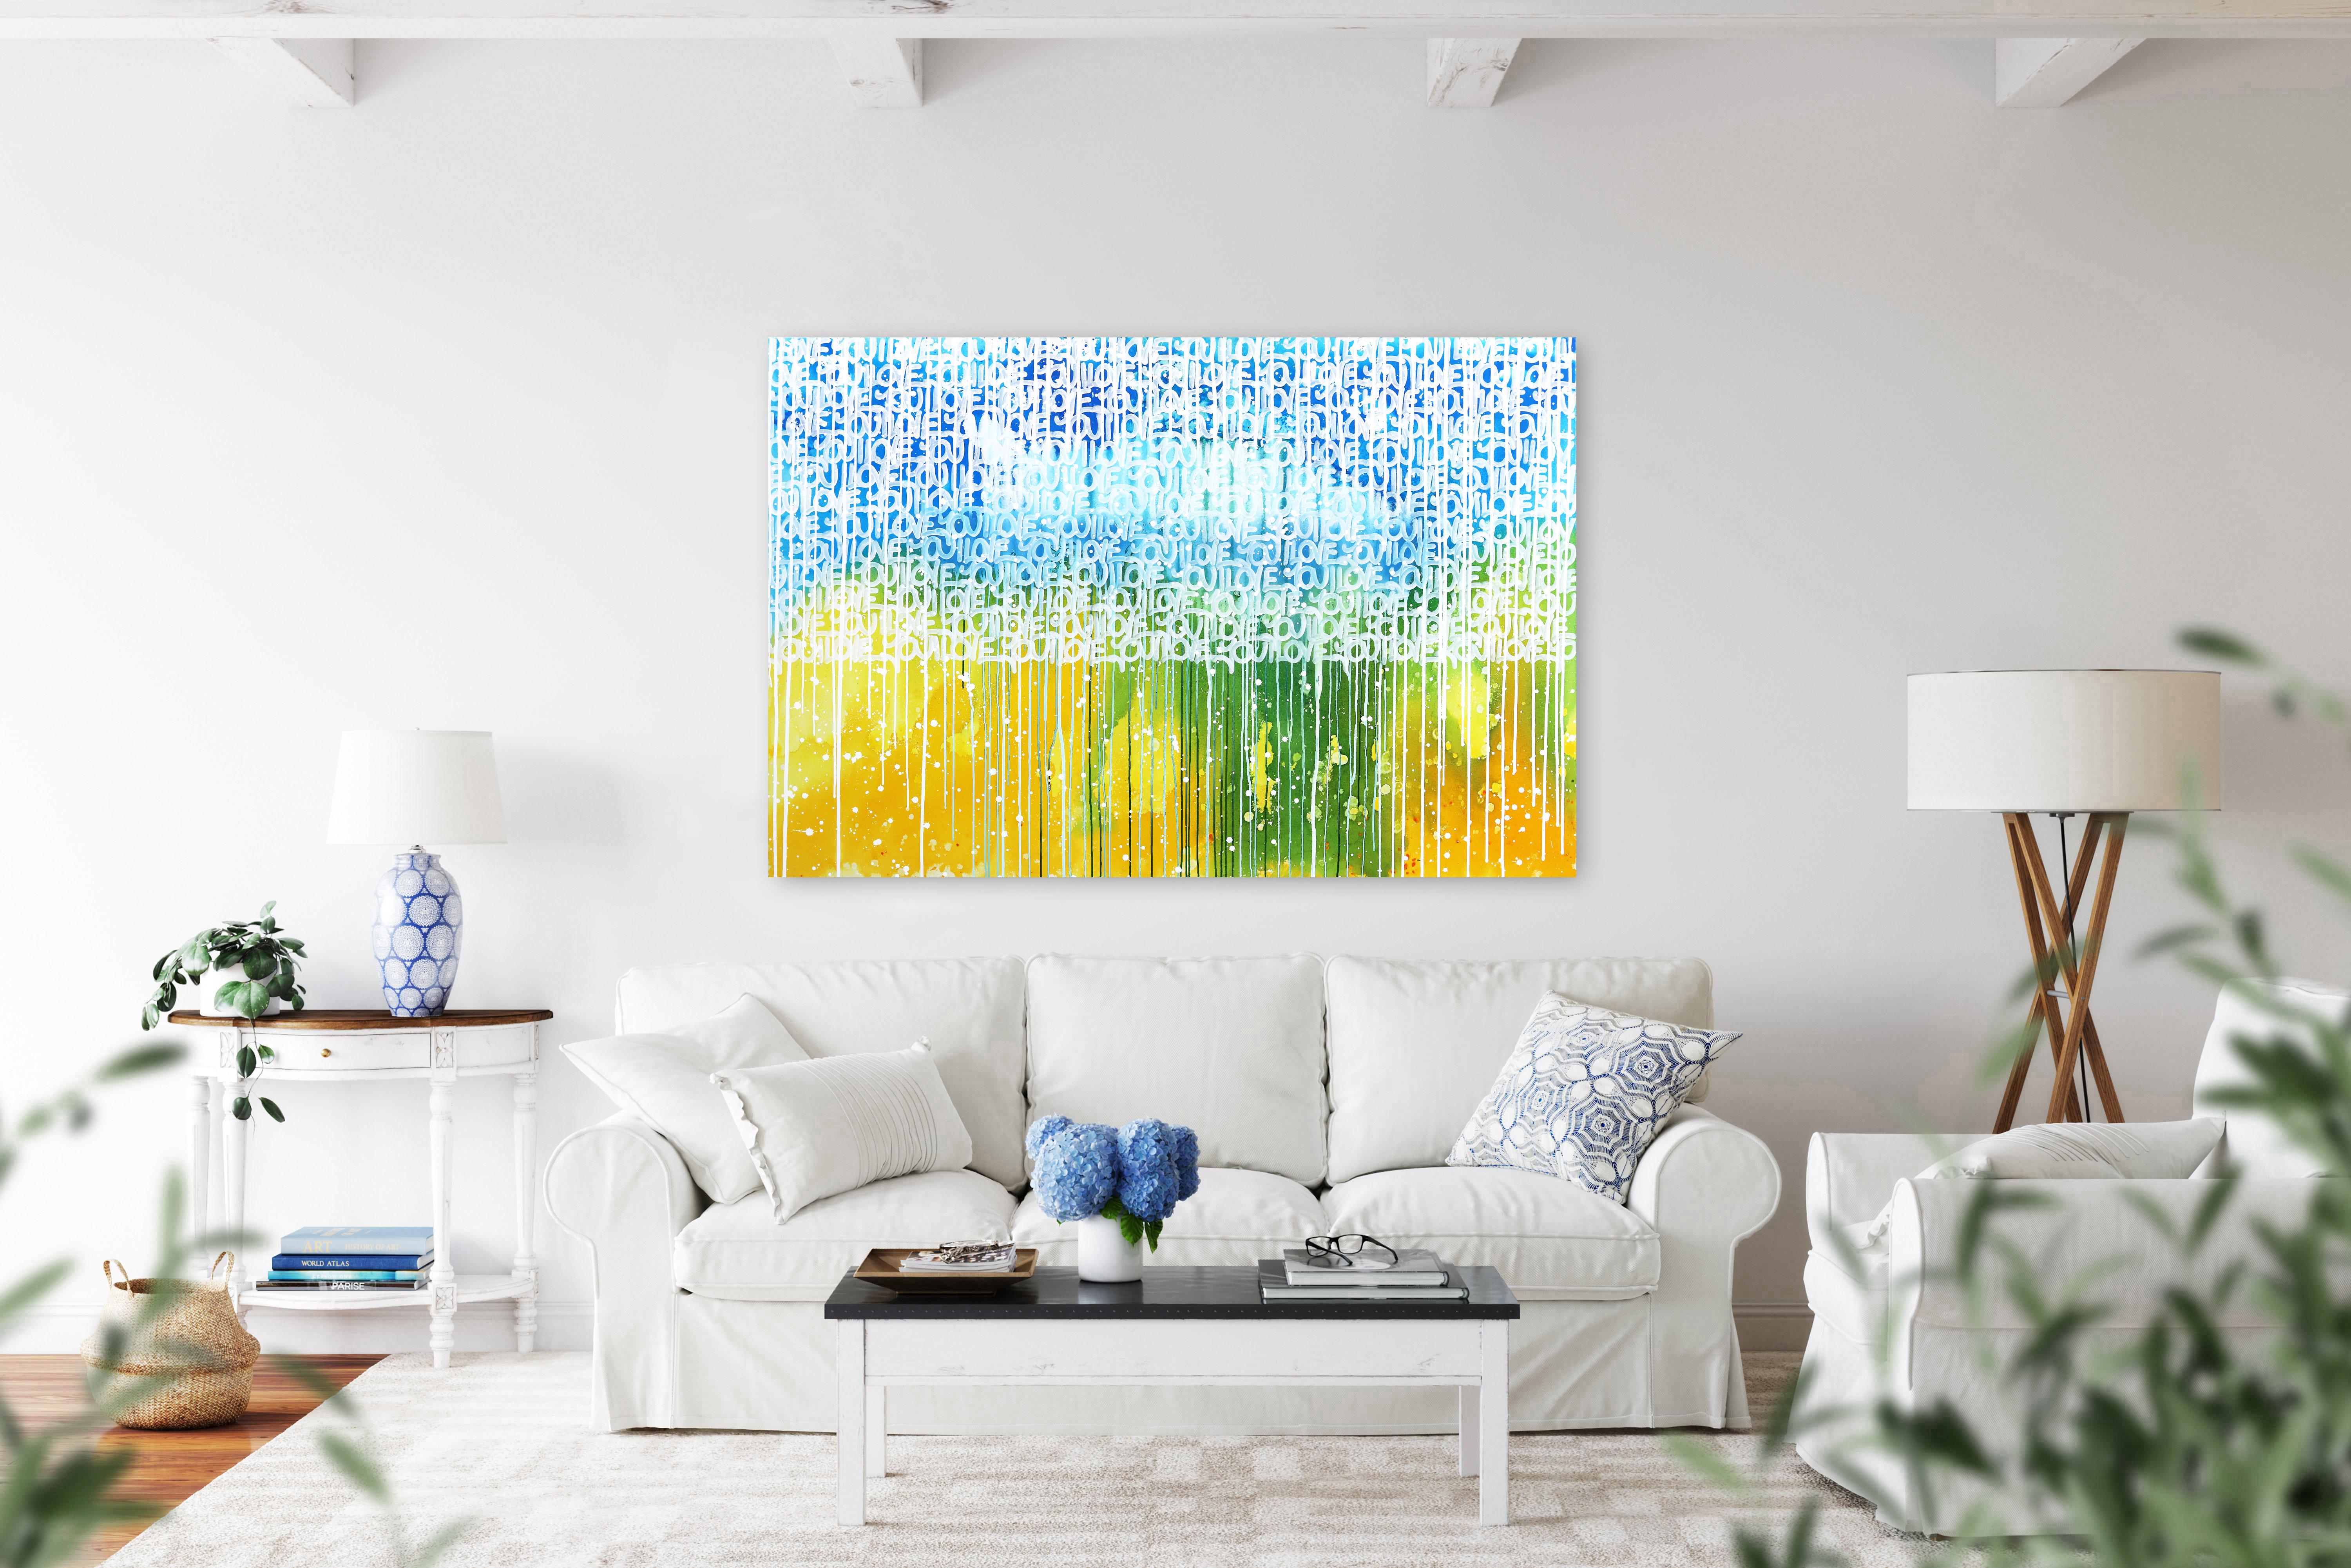 The Great Barrier Reef - Large Original Colorful Urban Love Pop Street Art - Painting by Amber Goldhammer